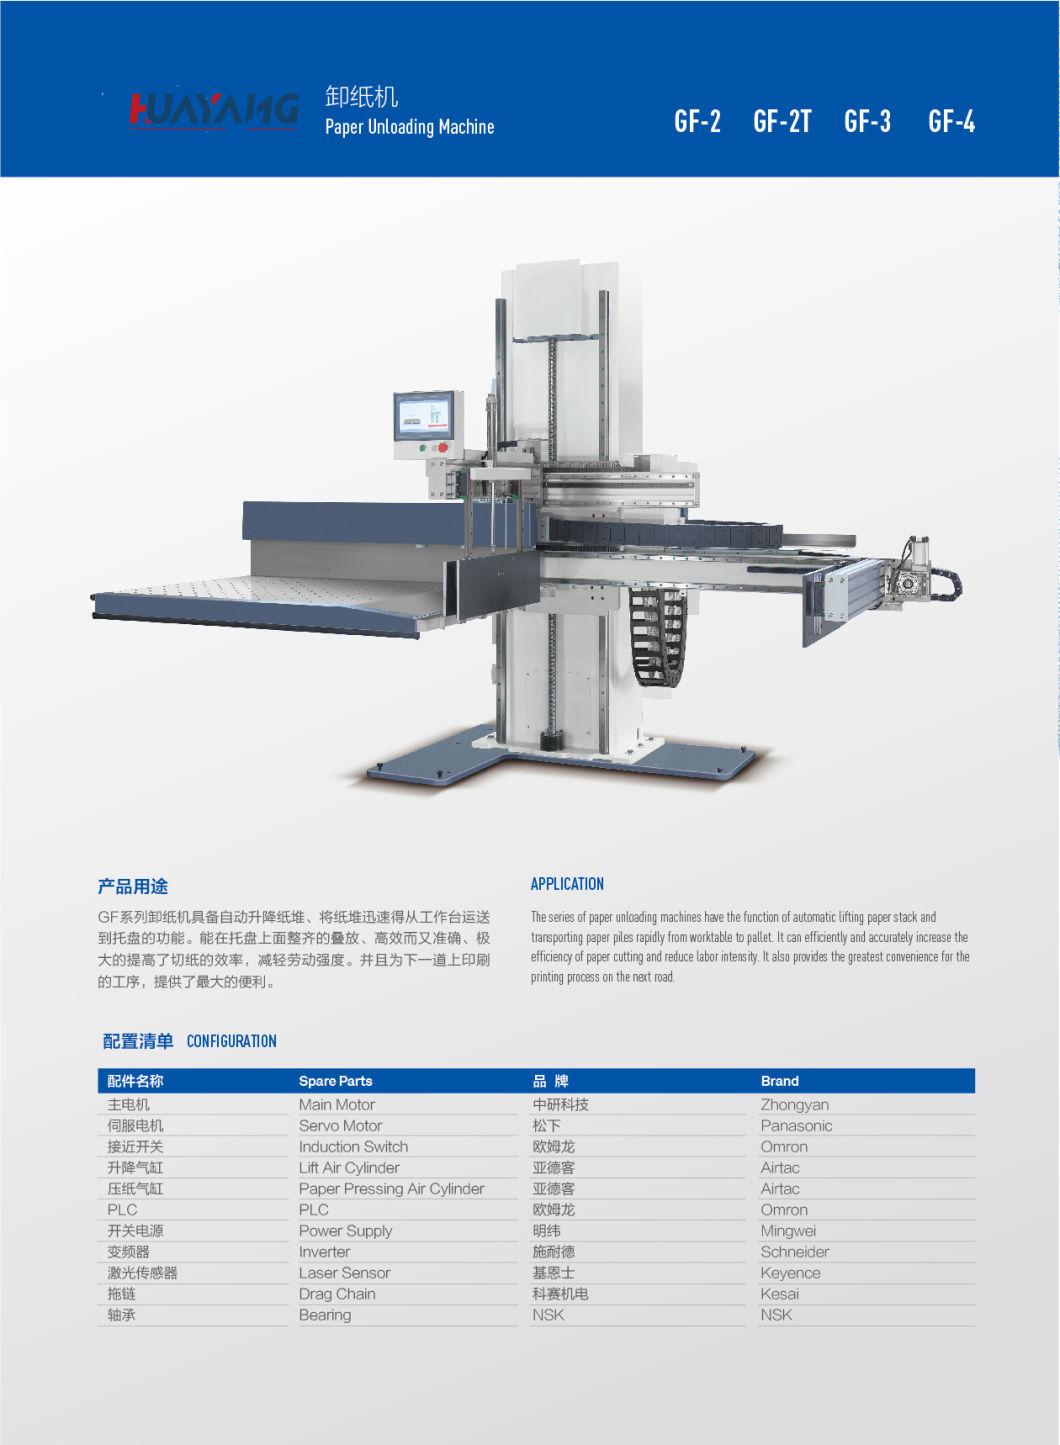 Automatic Stack Unloader for Paper Cutting Machine Hyq1370